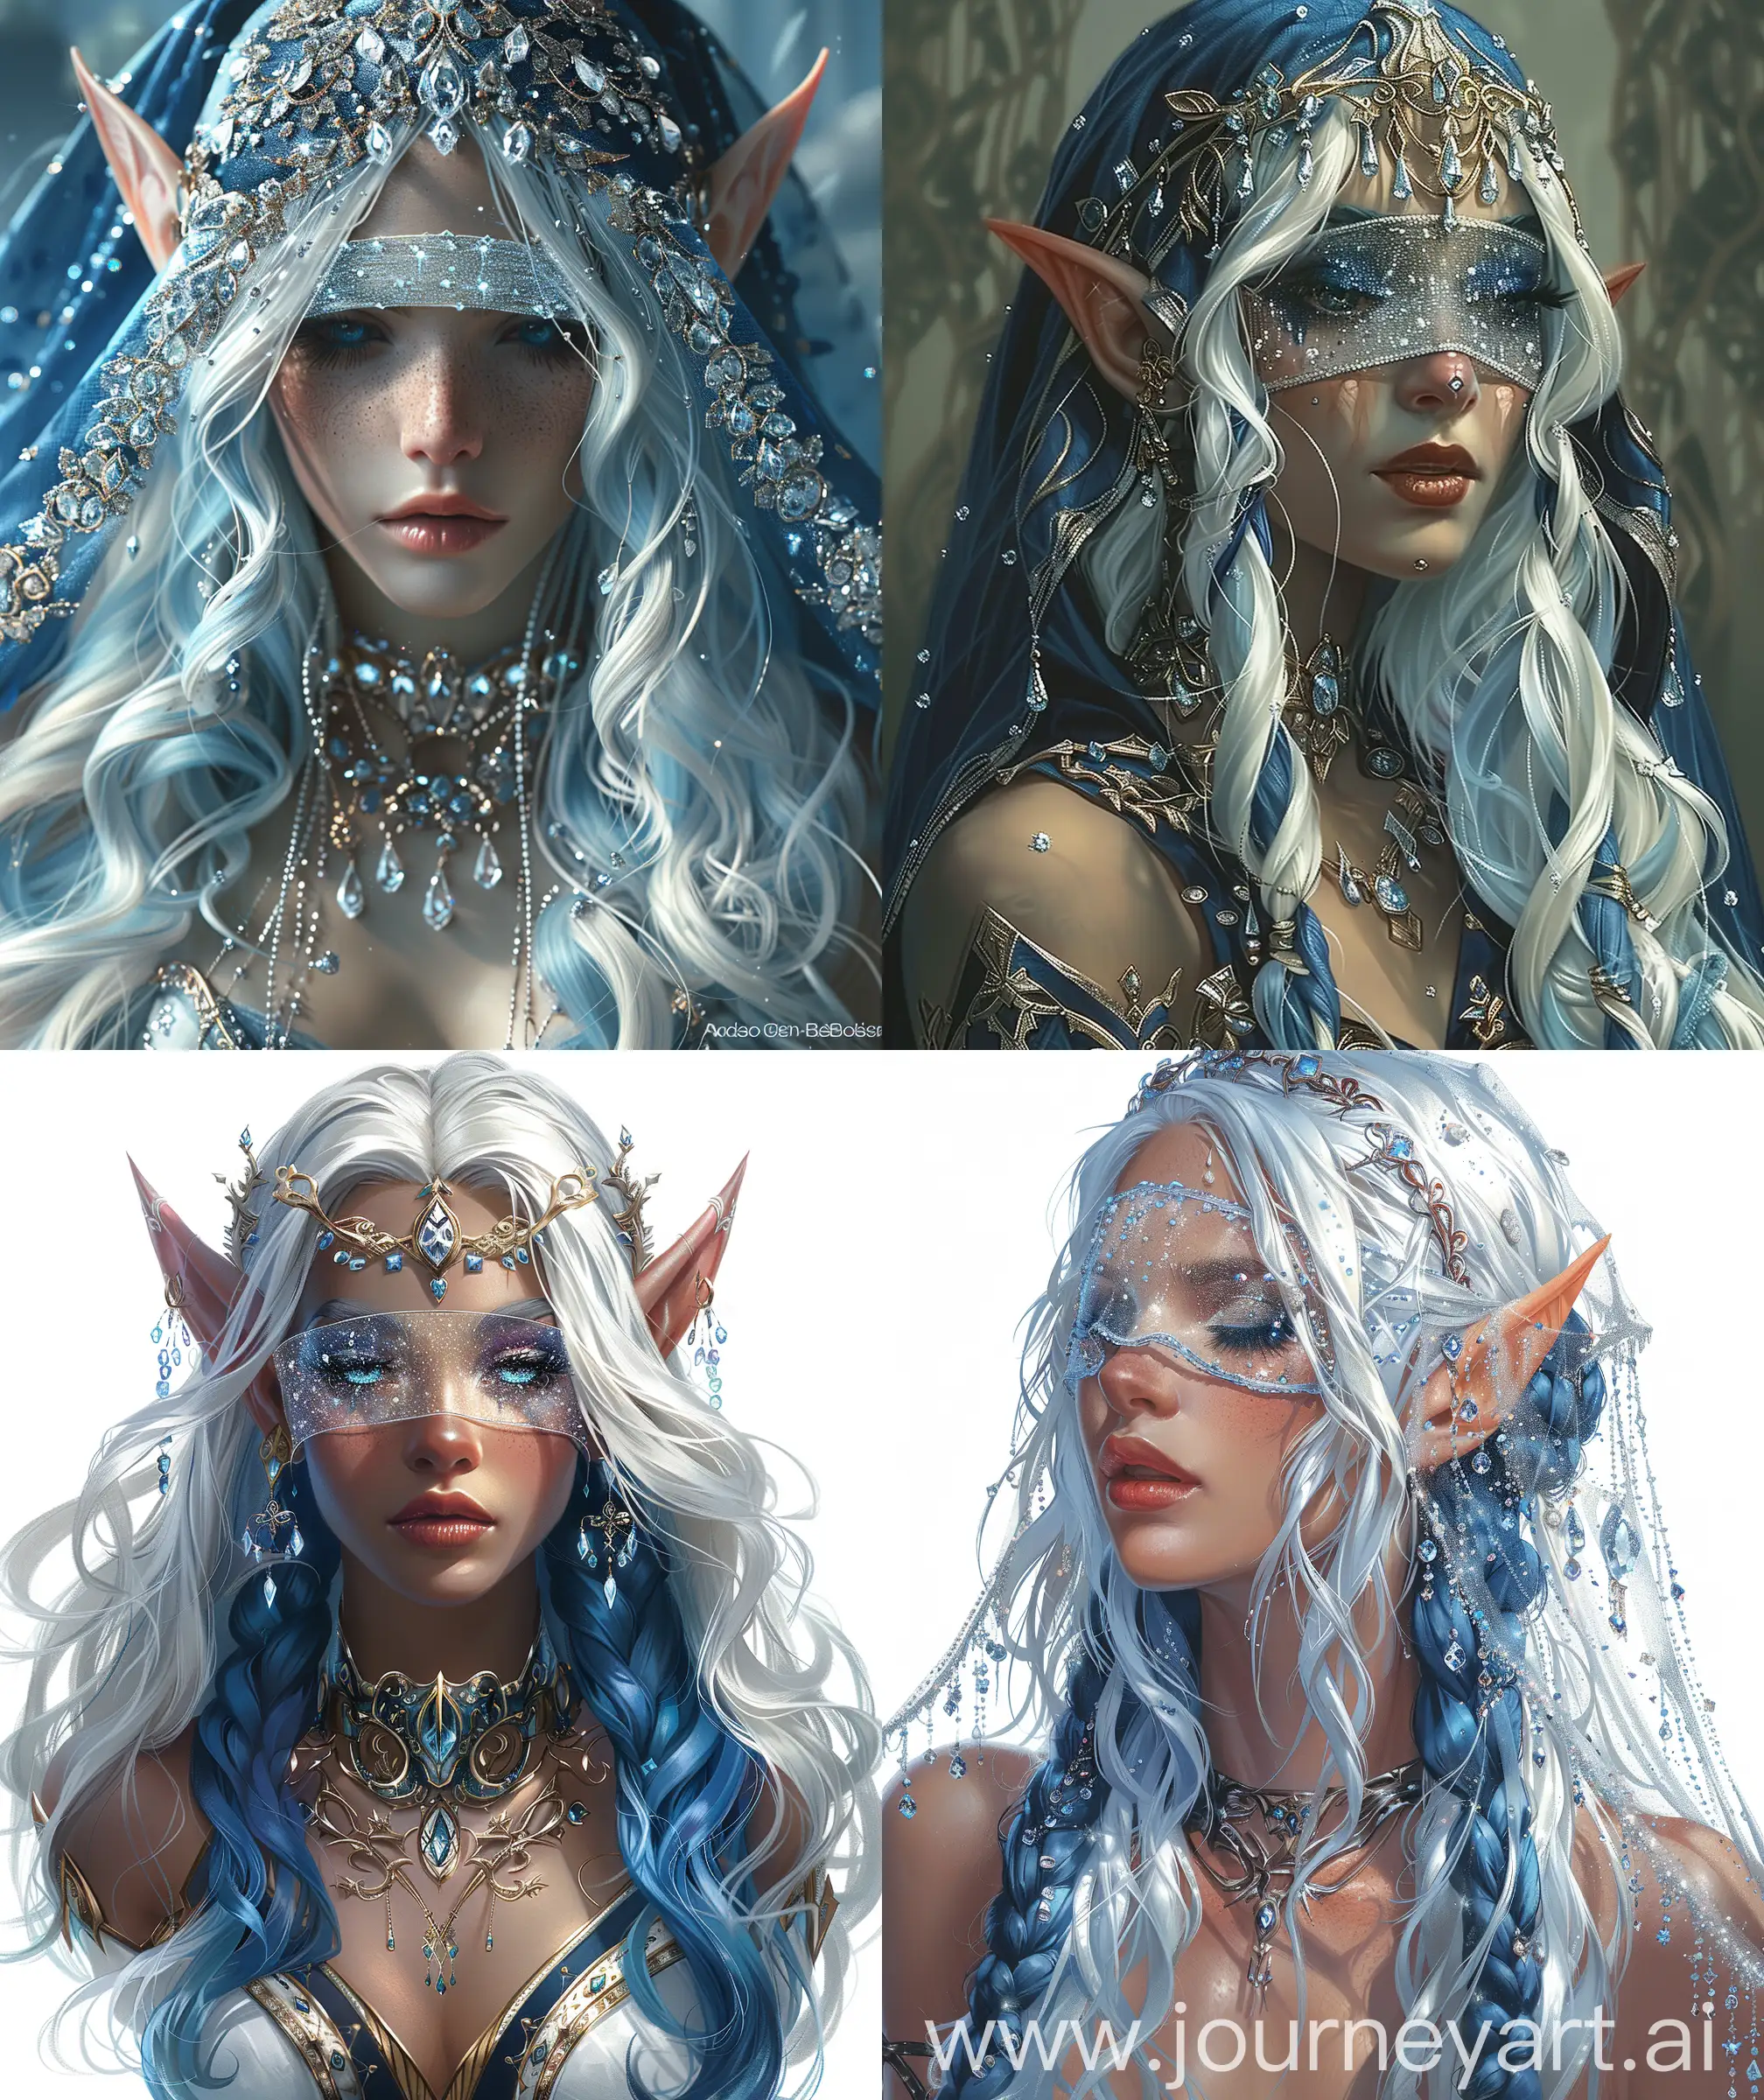 Stunning-Portrait-of-an-Elf-Woman-with-White-and-Blue-Hair-and-Crystal-Veil-Blindfold